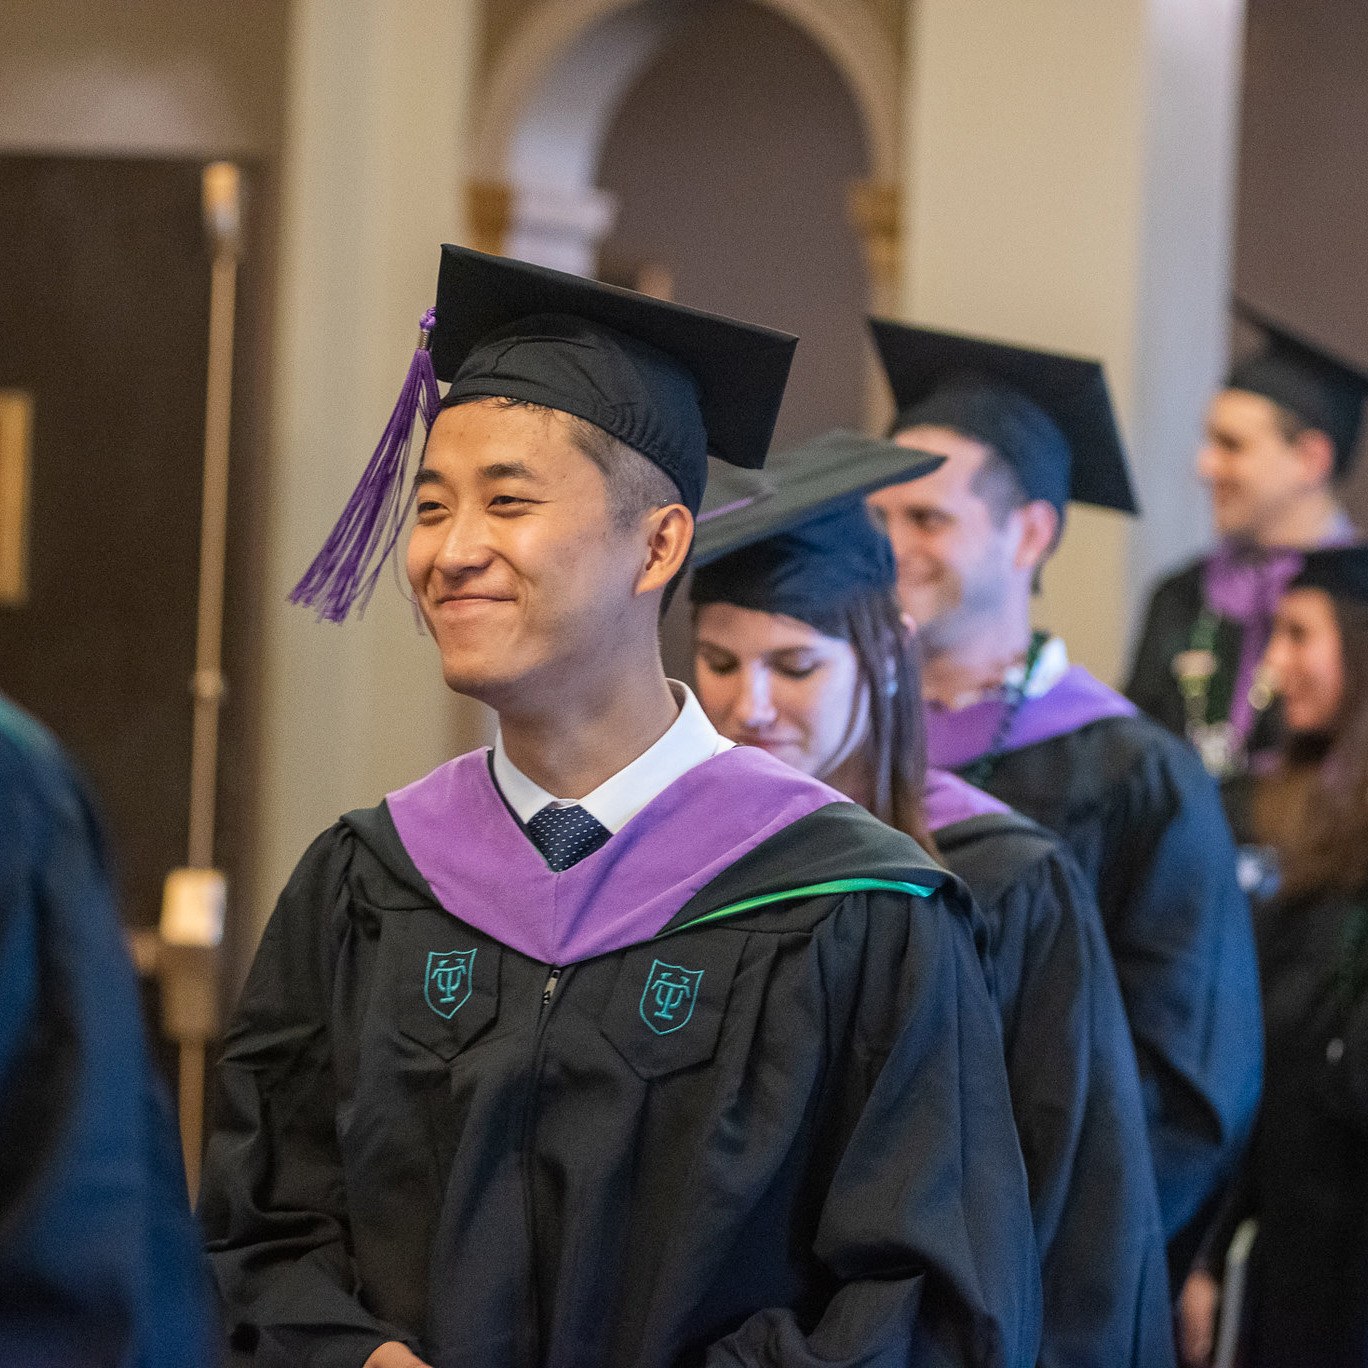 Student smiling in graduation cap and gown with line of fellow graduates behind him.